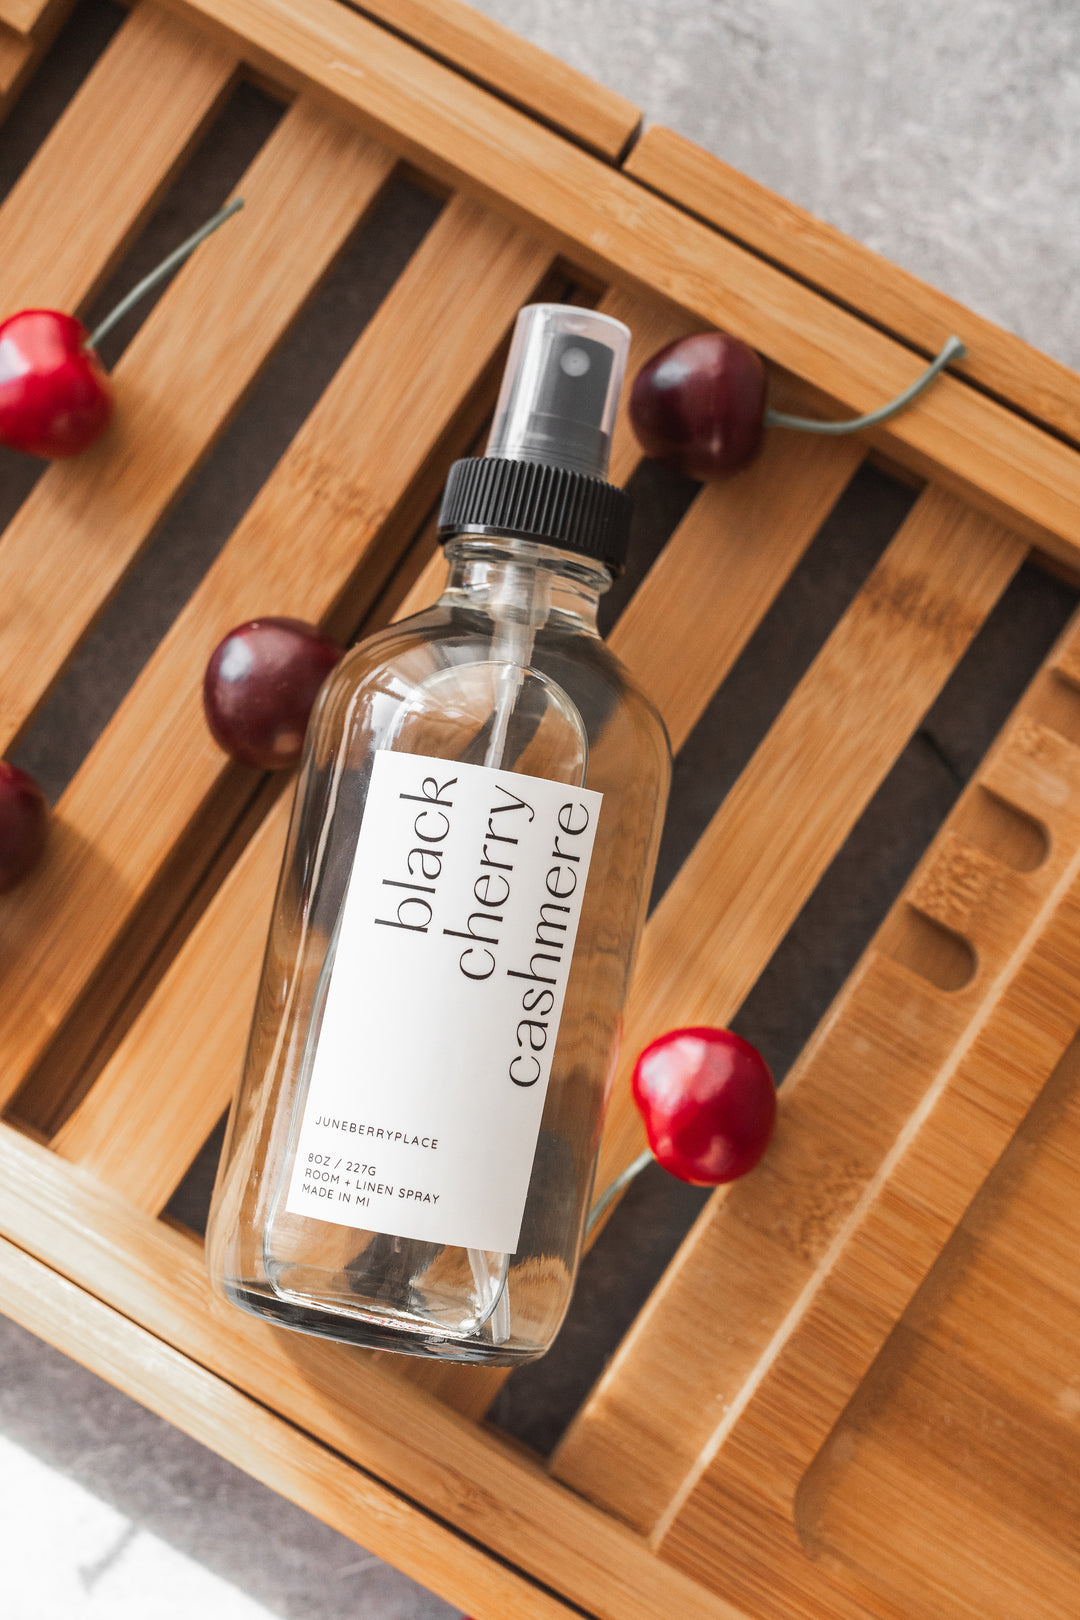 Black Cherry Cashmere Room and Linen Spray in clear glass spray bottle by juneberryplace home fragrances